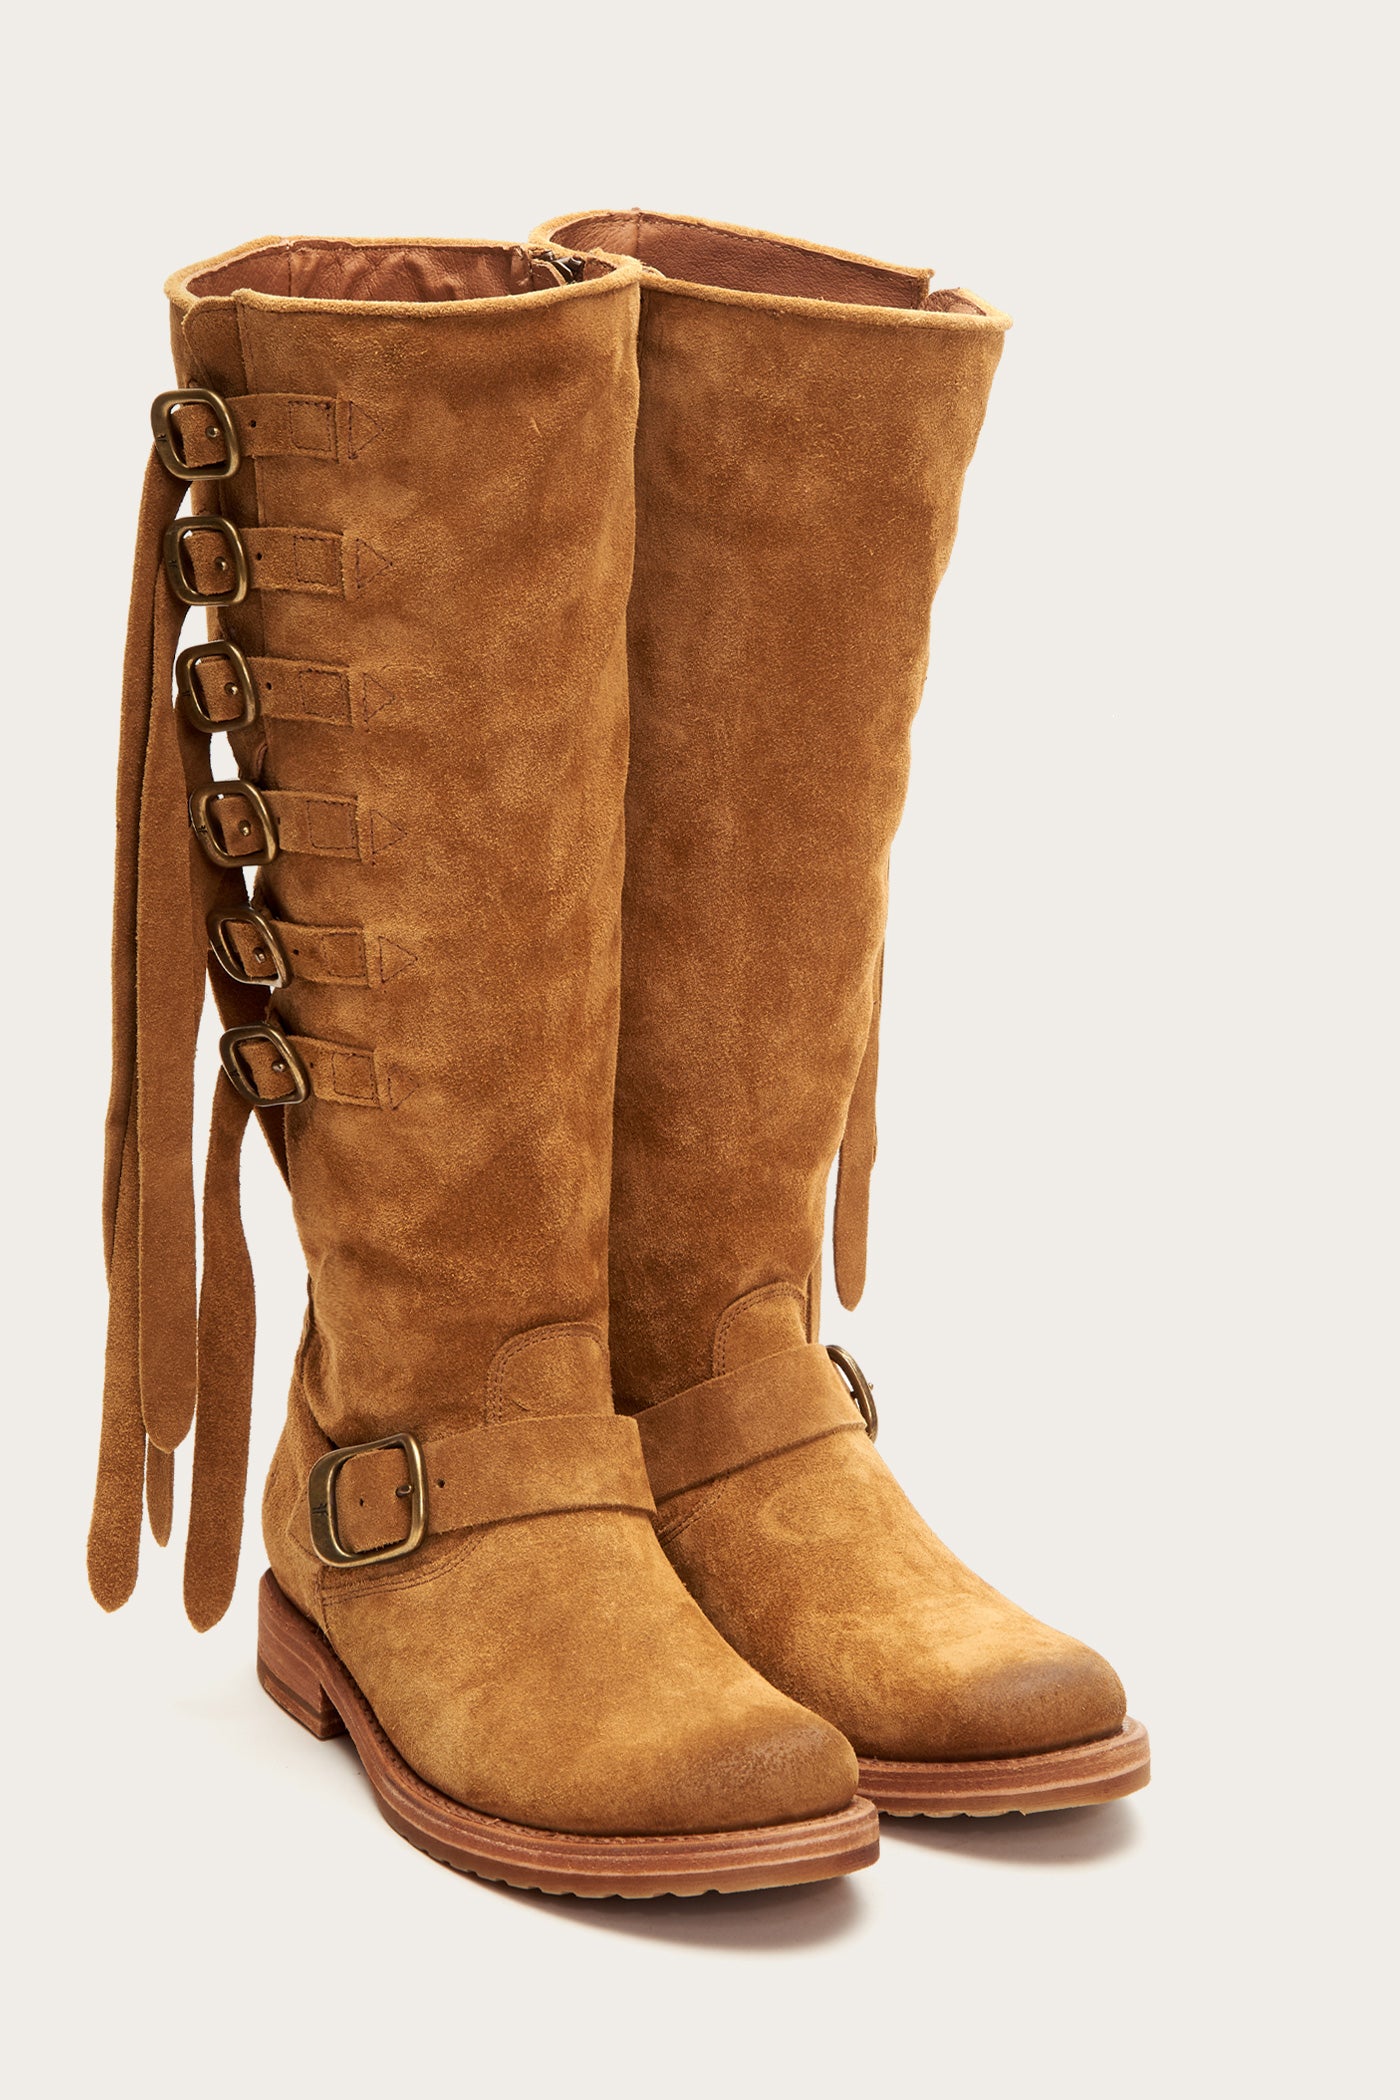 frye veronica strap tall boots